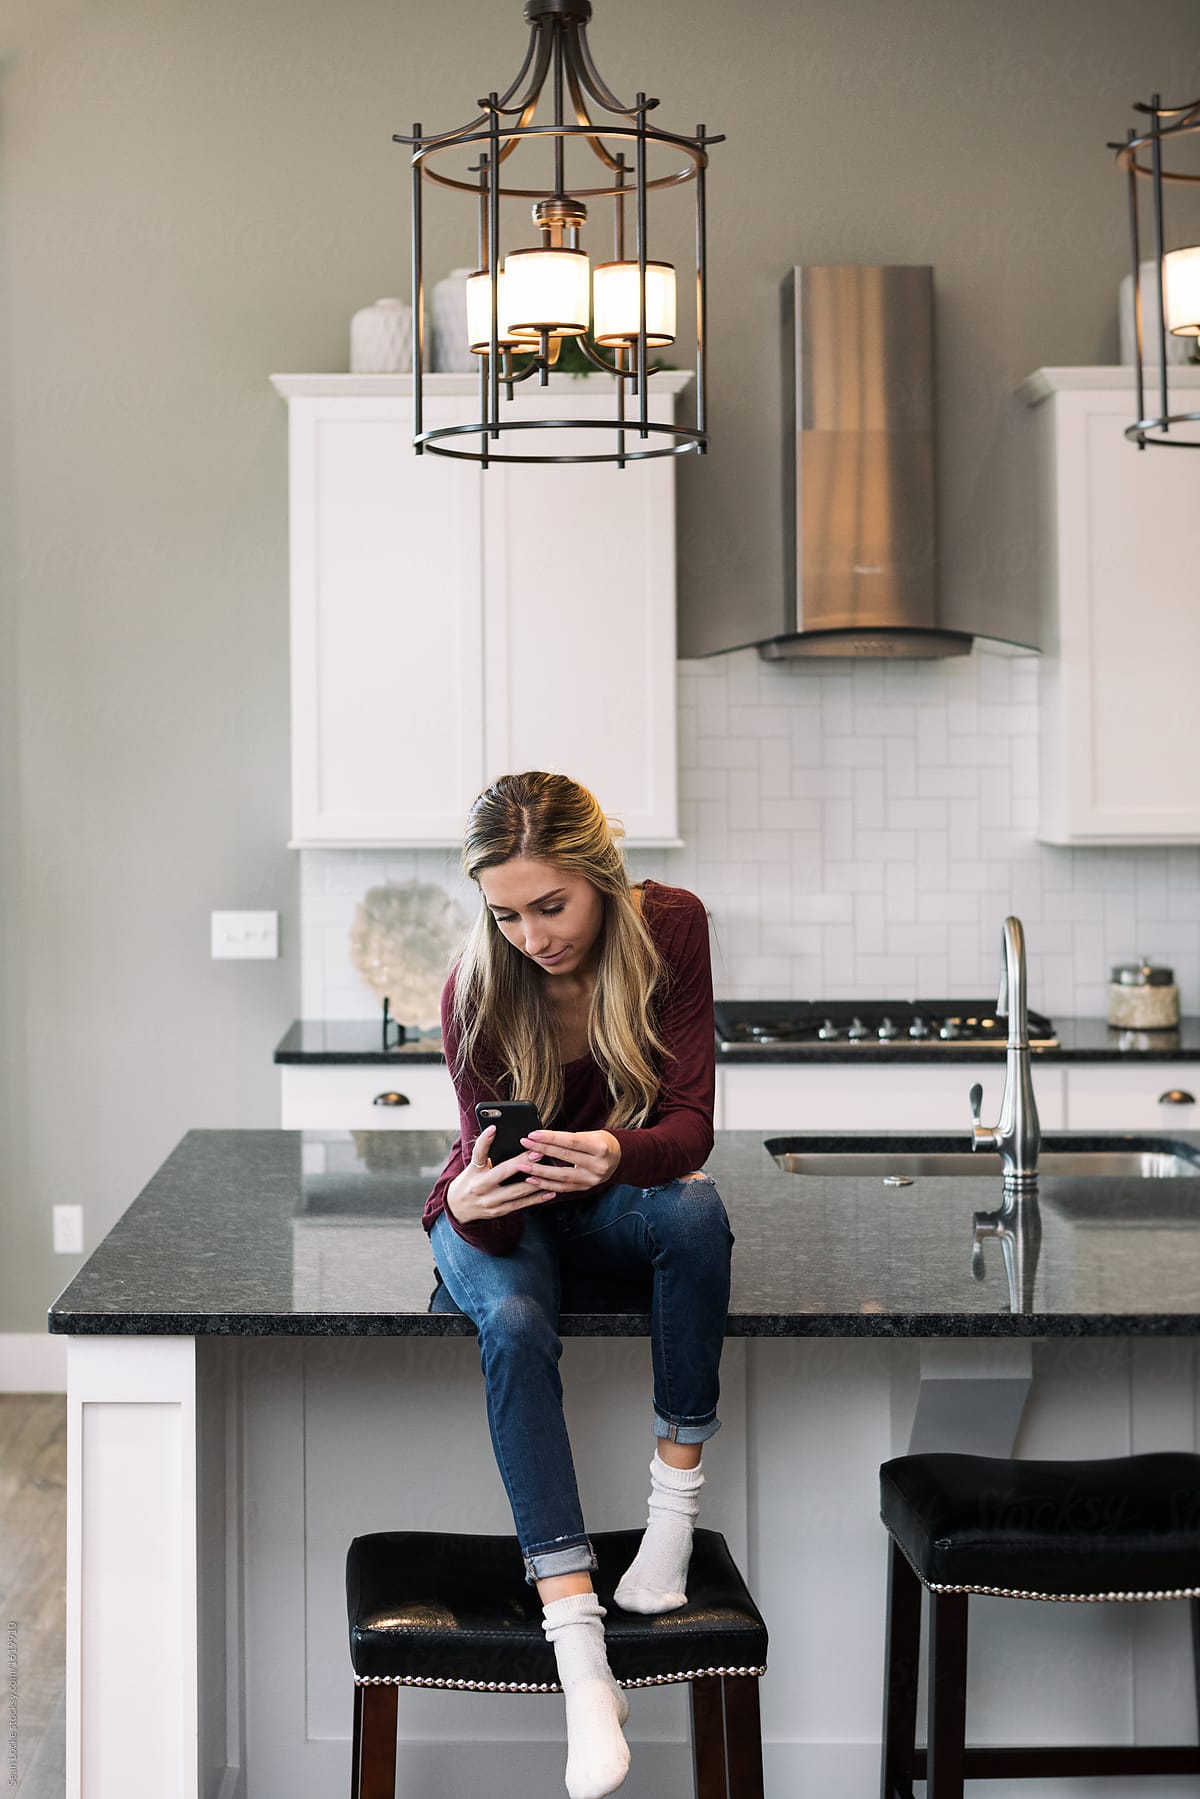 Home: Teen Sits On Counter Checking Email On Phone